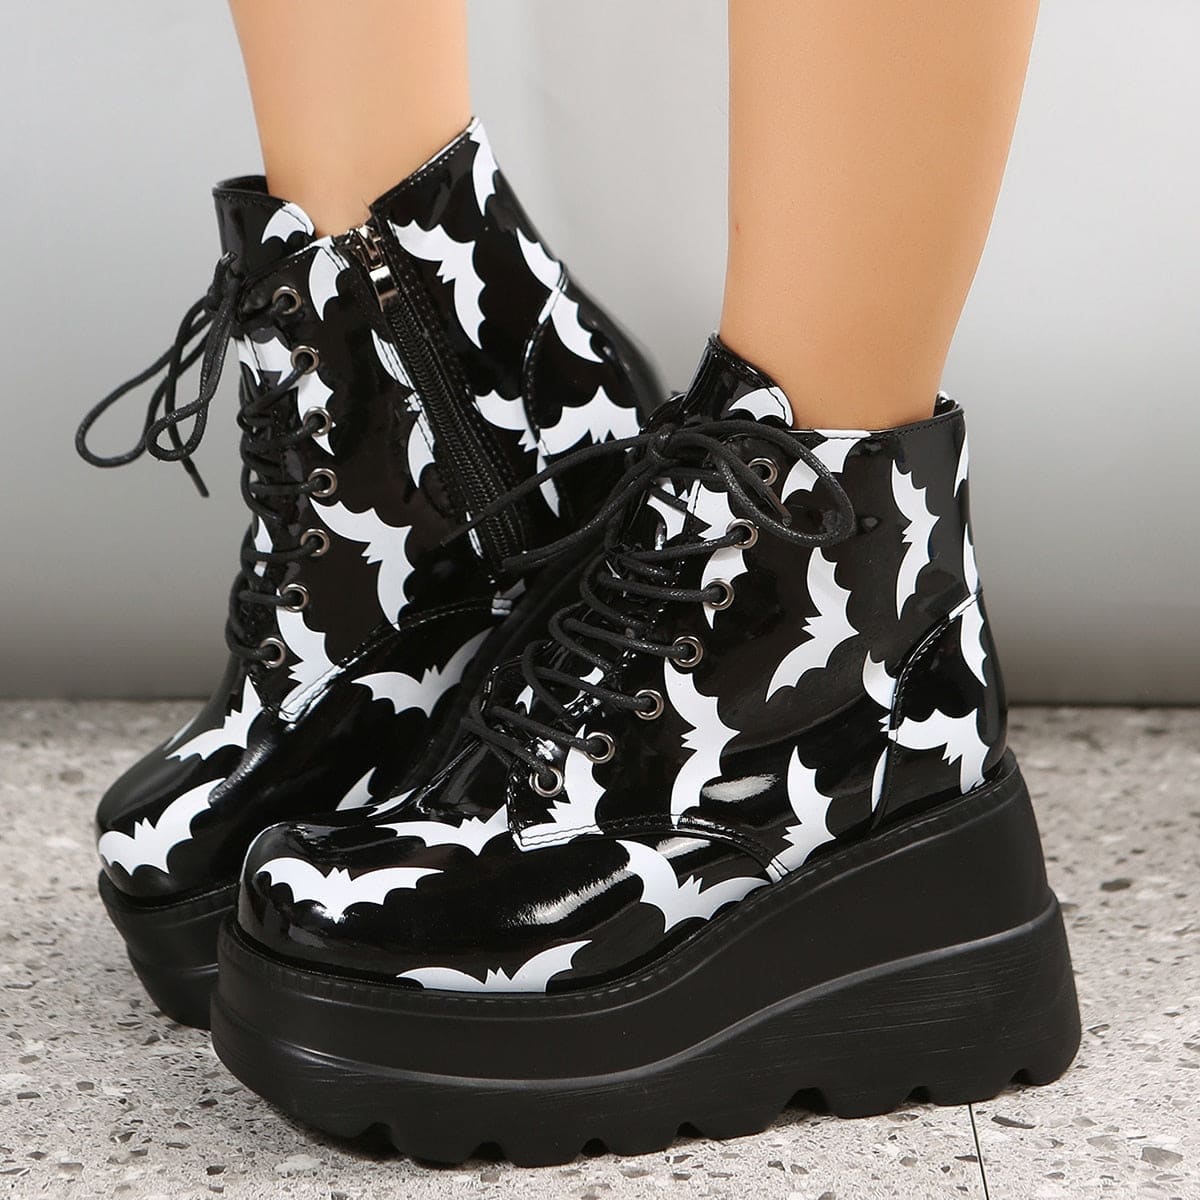 Bat Cave Booties - boots ankle boots, bats, footwear, goth Shoes